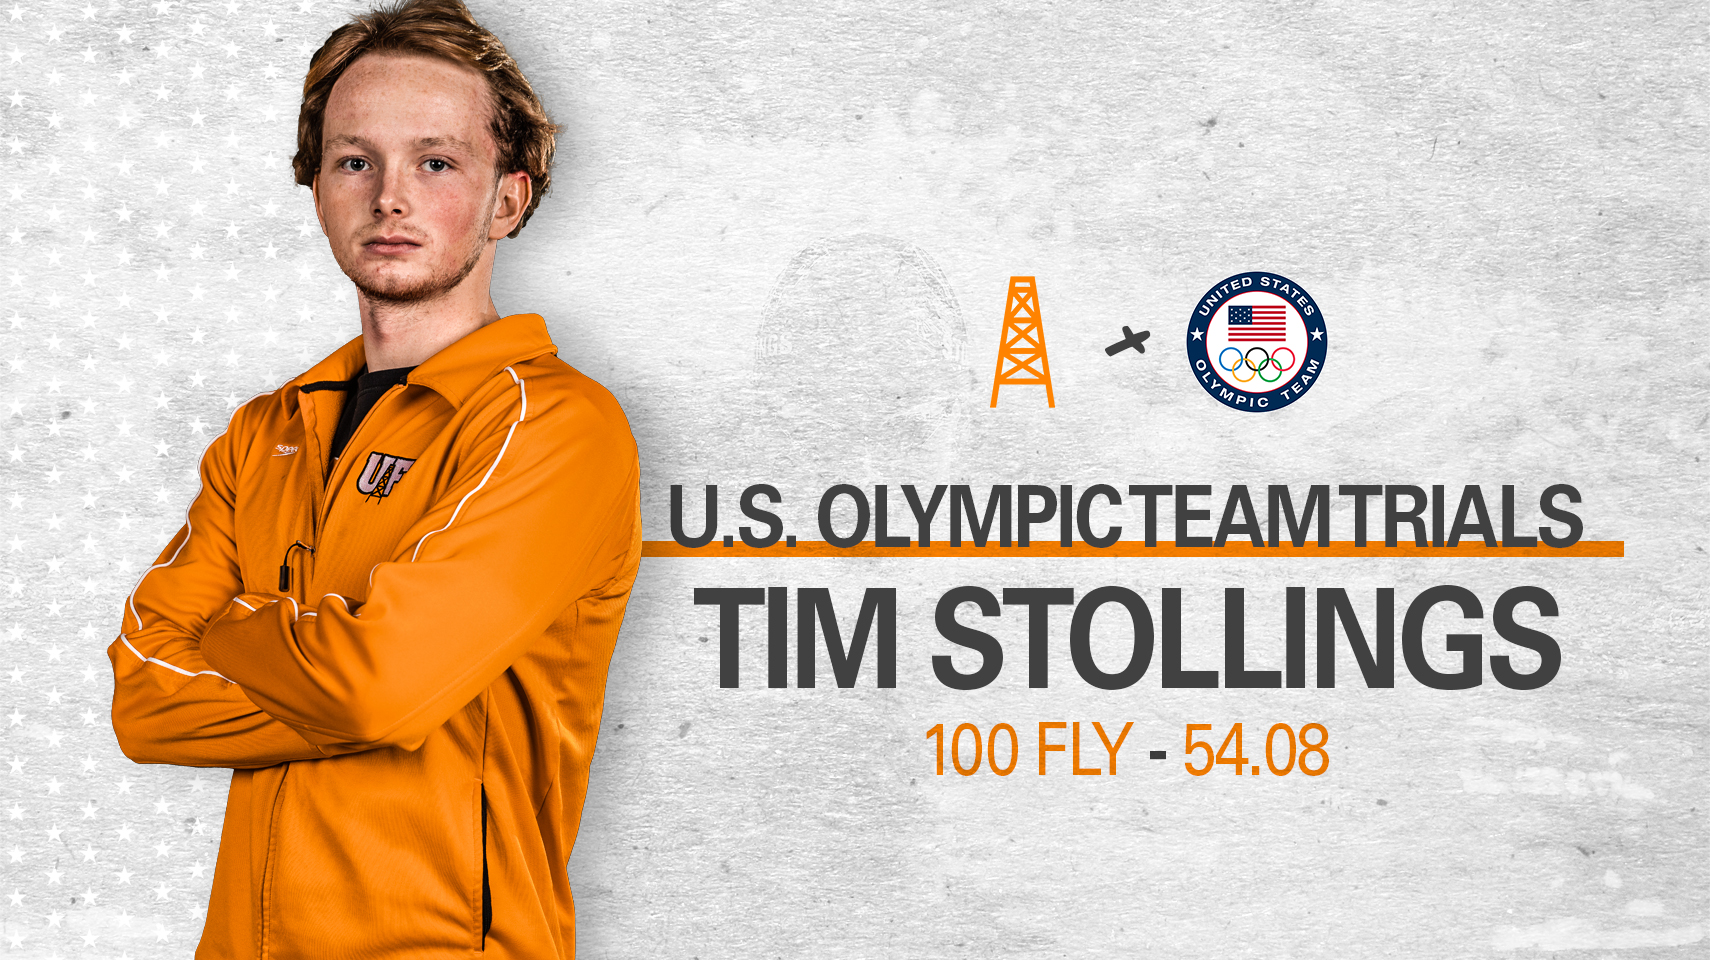 Stollings Qualifies for US Olympic Trials